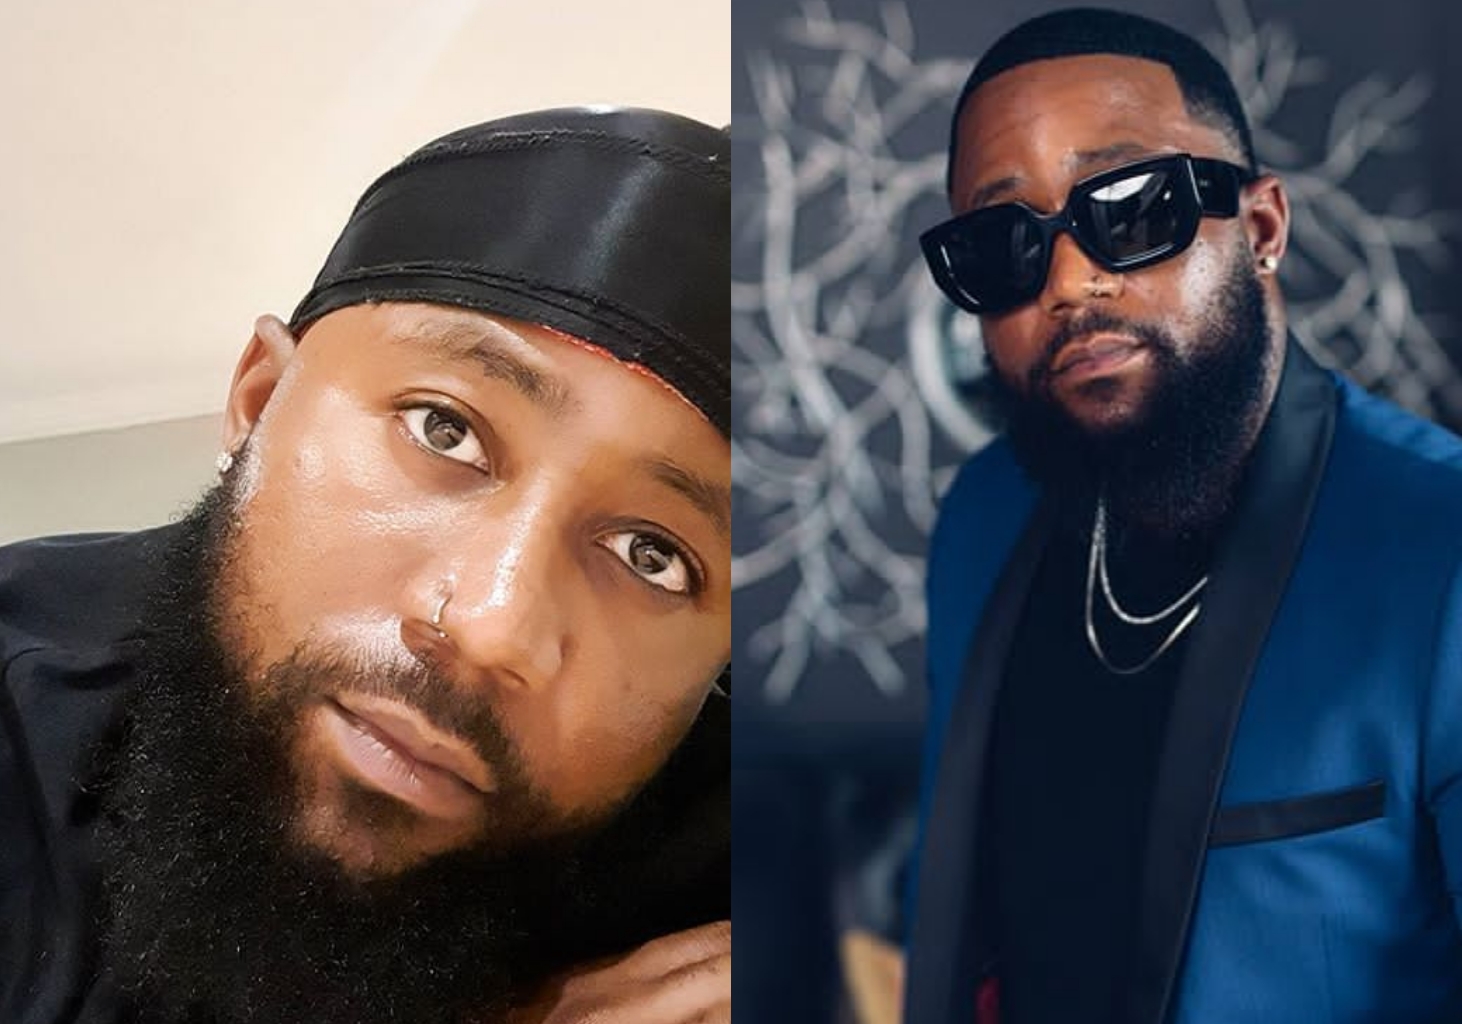 "We don't have what to eat if Coronavirus last more than 3 months" – Rapper, Cassper Nyovest cries out